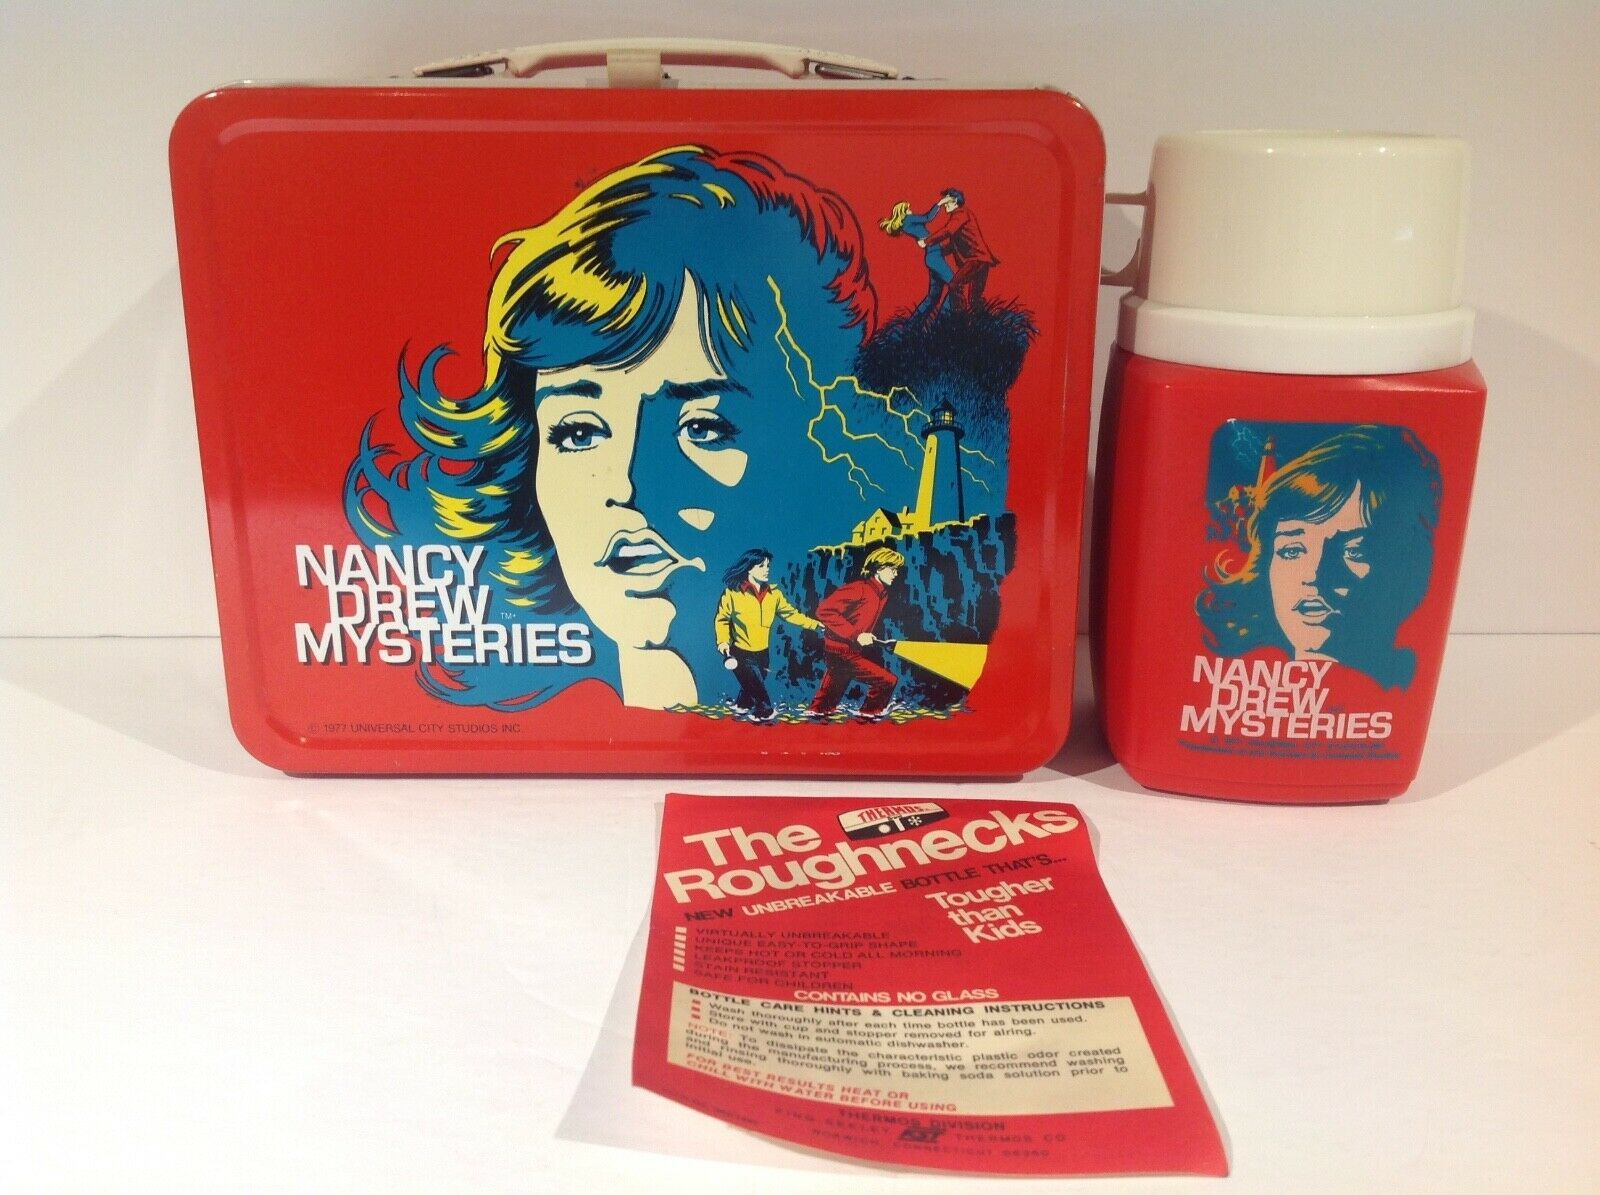 Valuable Collectibles from the '70s - These 1970s Items Could Be Worth Money